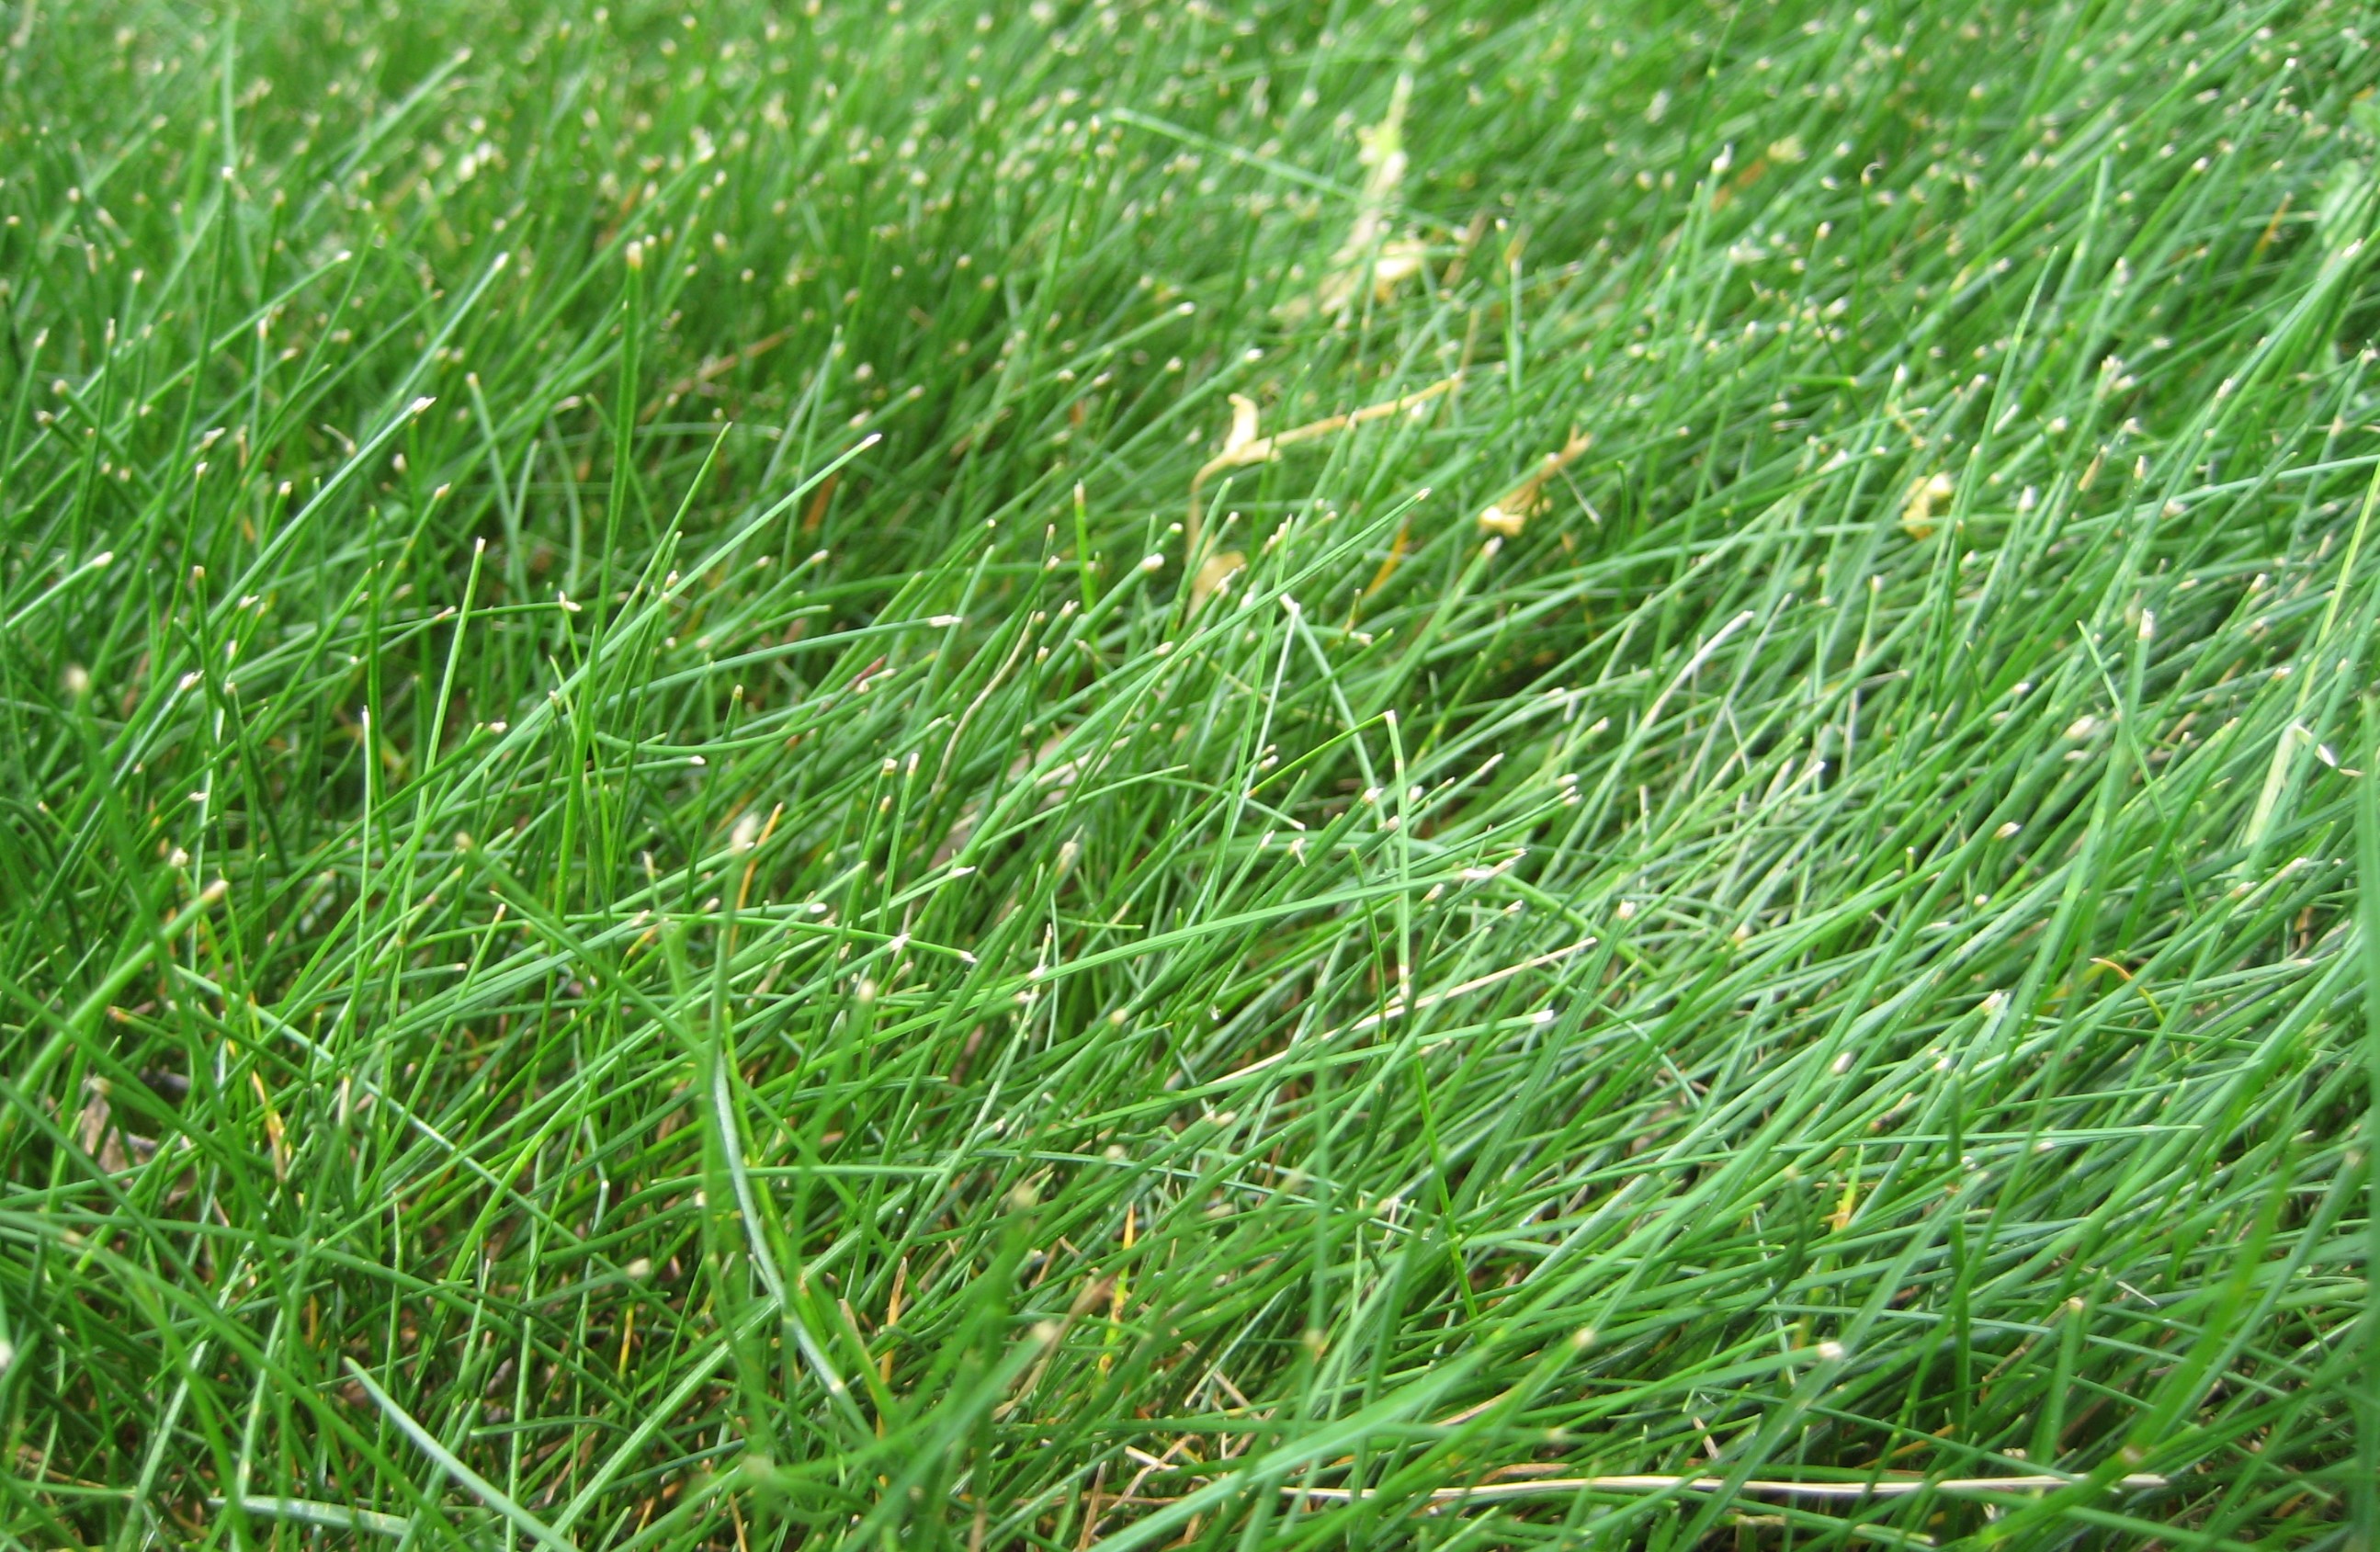 What Factors Influence Consumer Adoption Of Low Input Turfgrasses